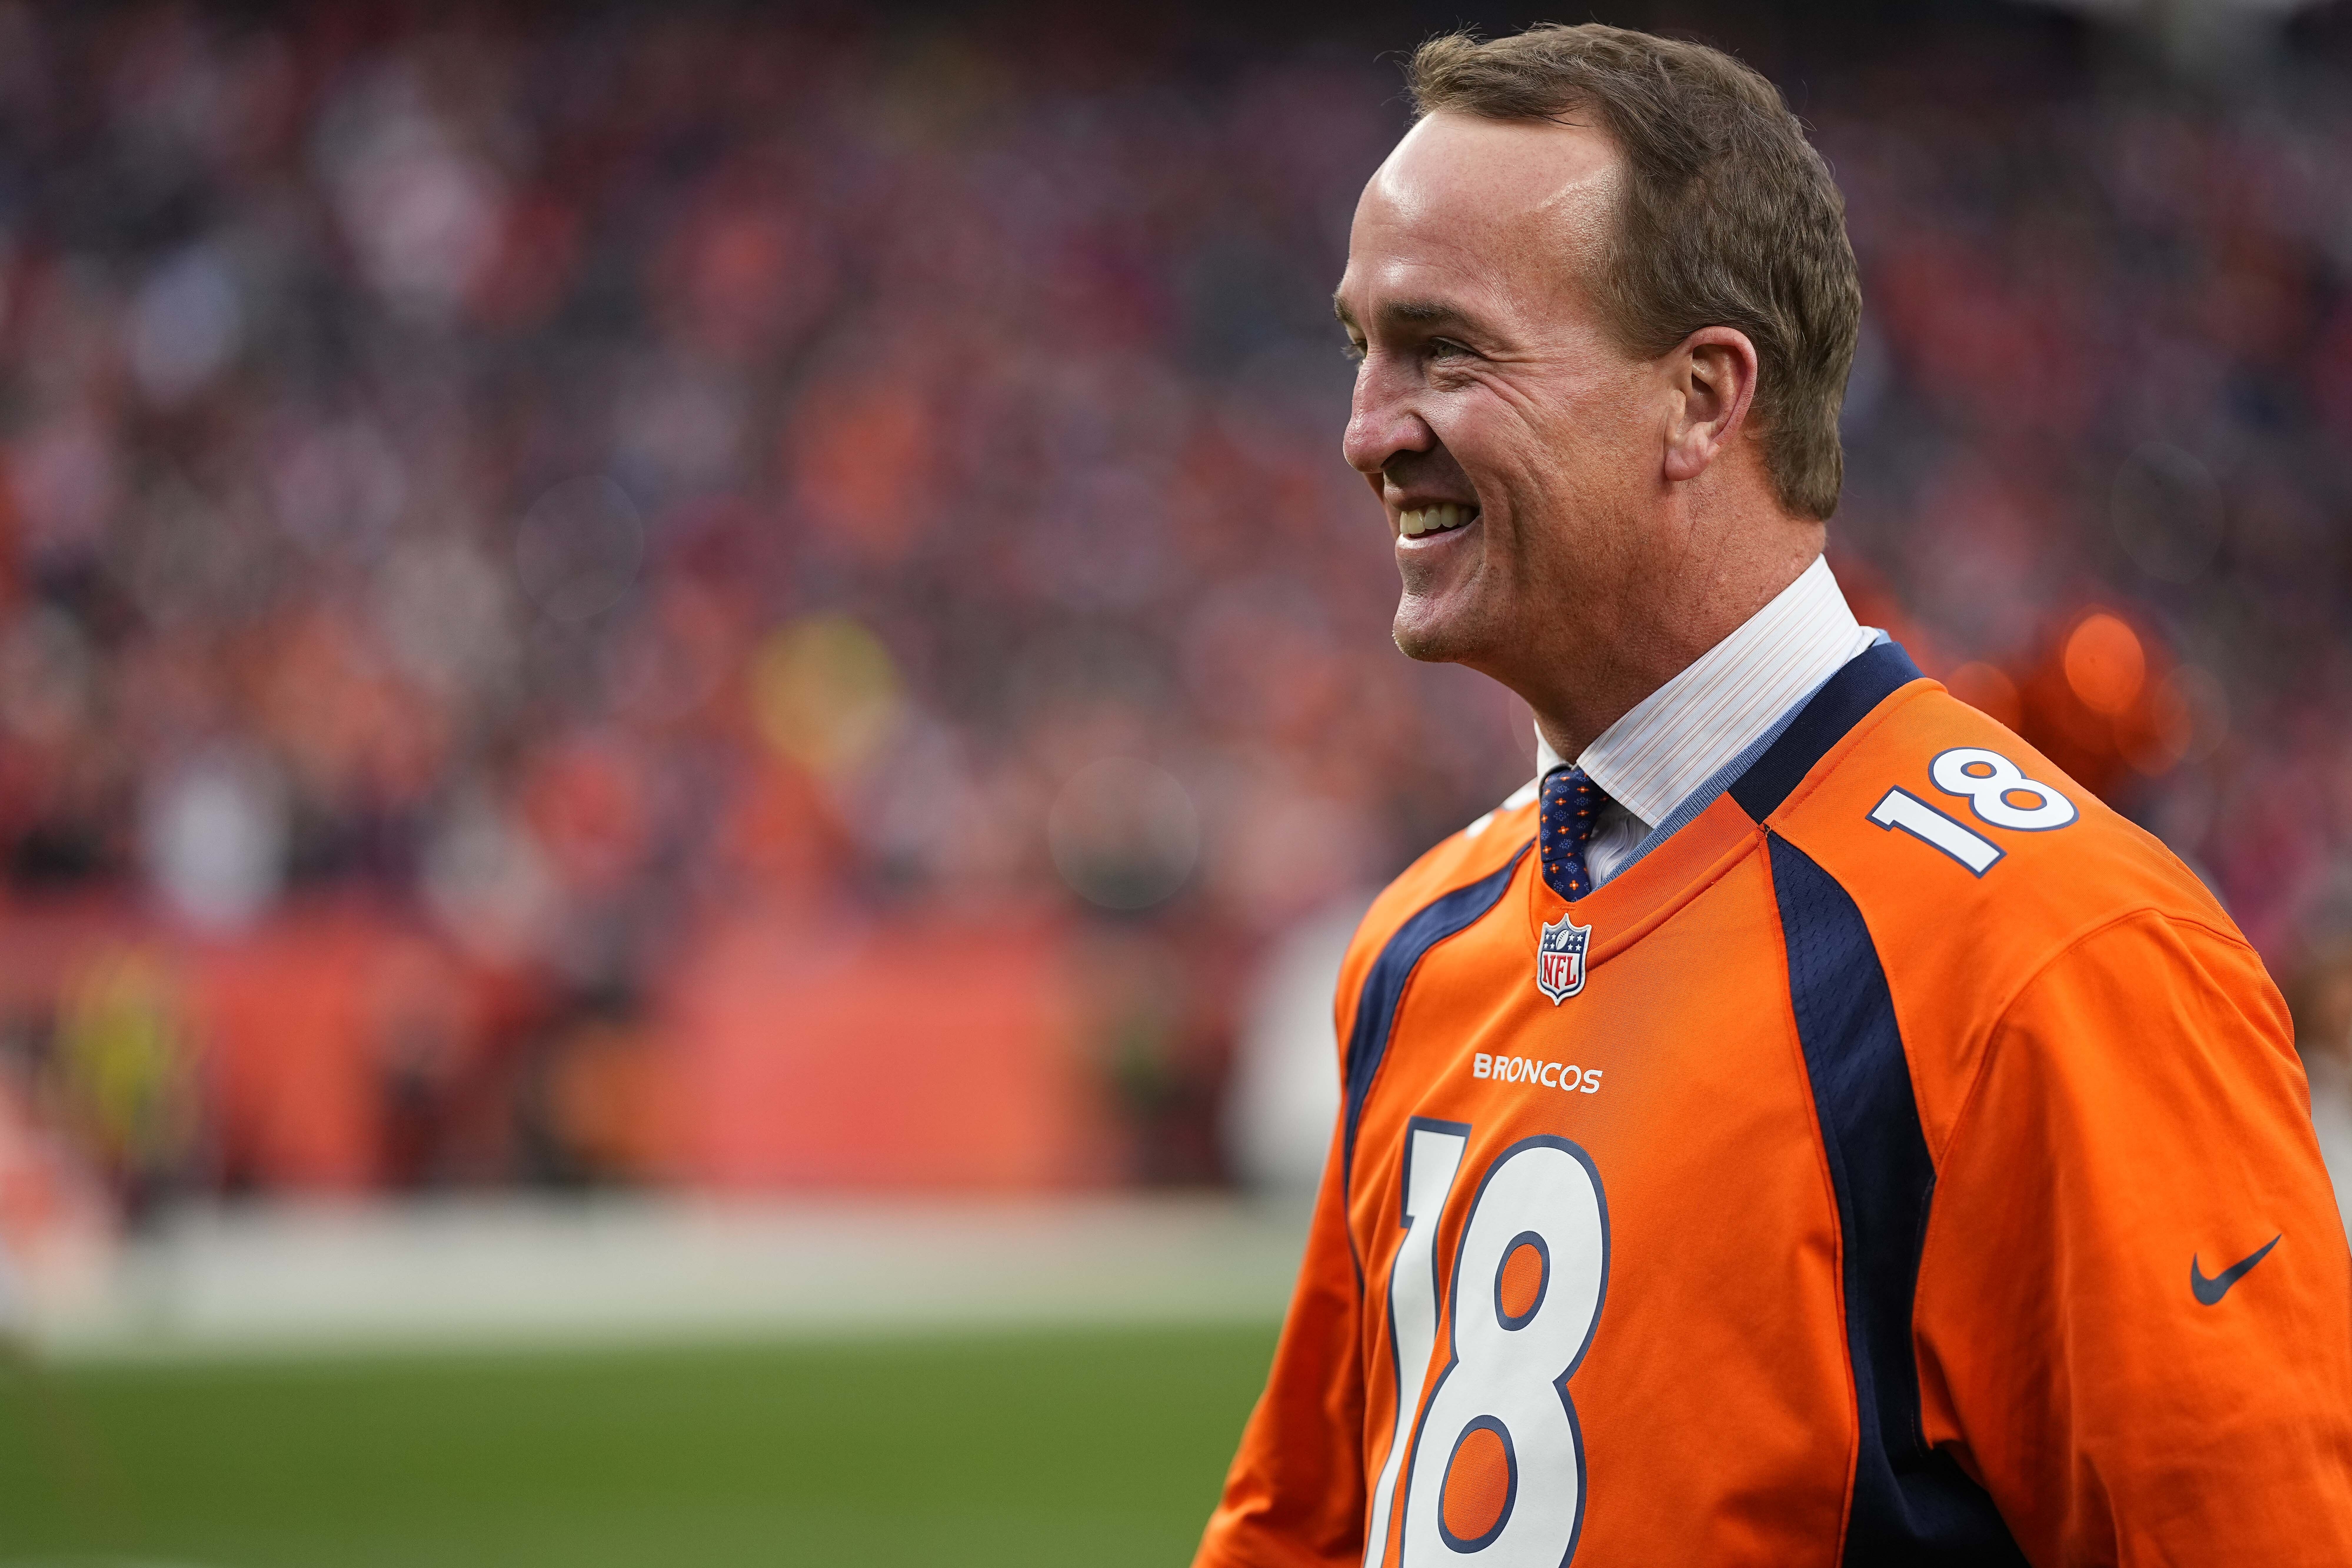 How to watch ESPN's 'ManningCast' during Broncos vs. Seahawks game  FREE  live stream, time, TV, channel for Peyton, Eli Manning broadcast on ESPN 2  